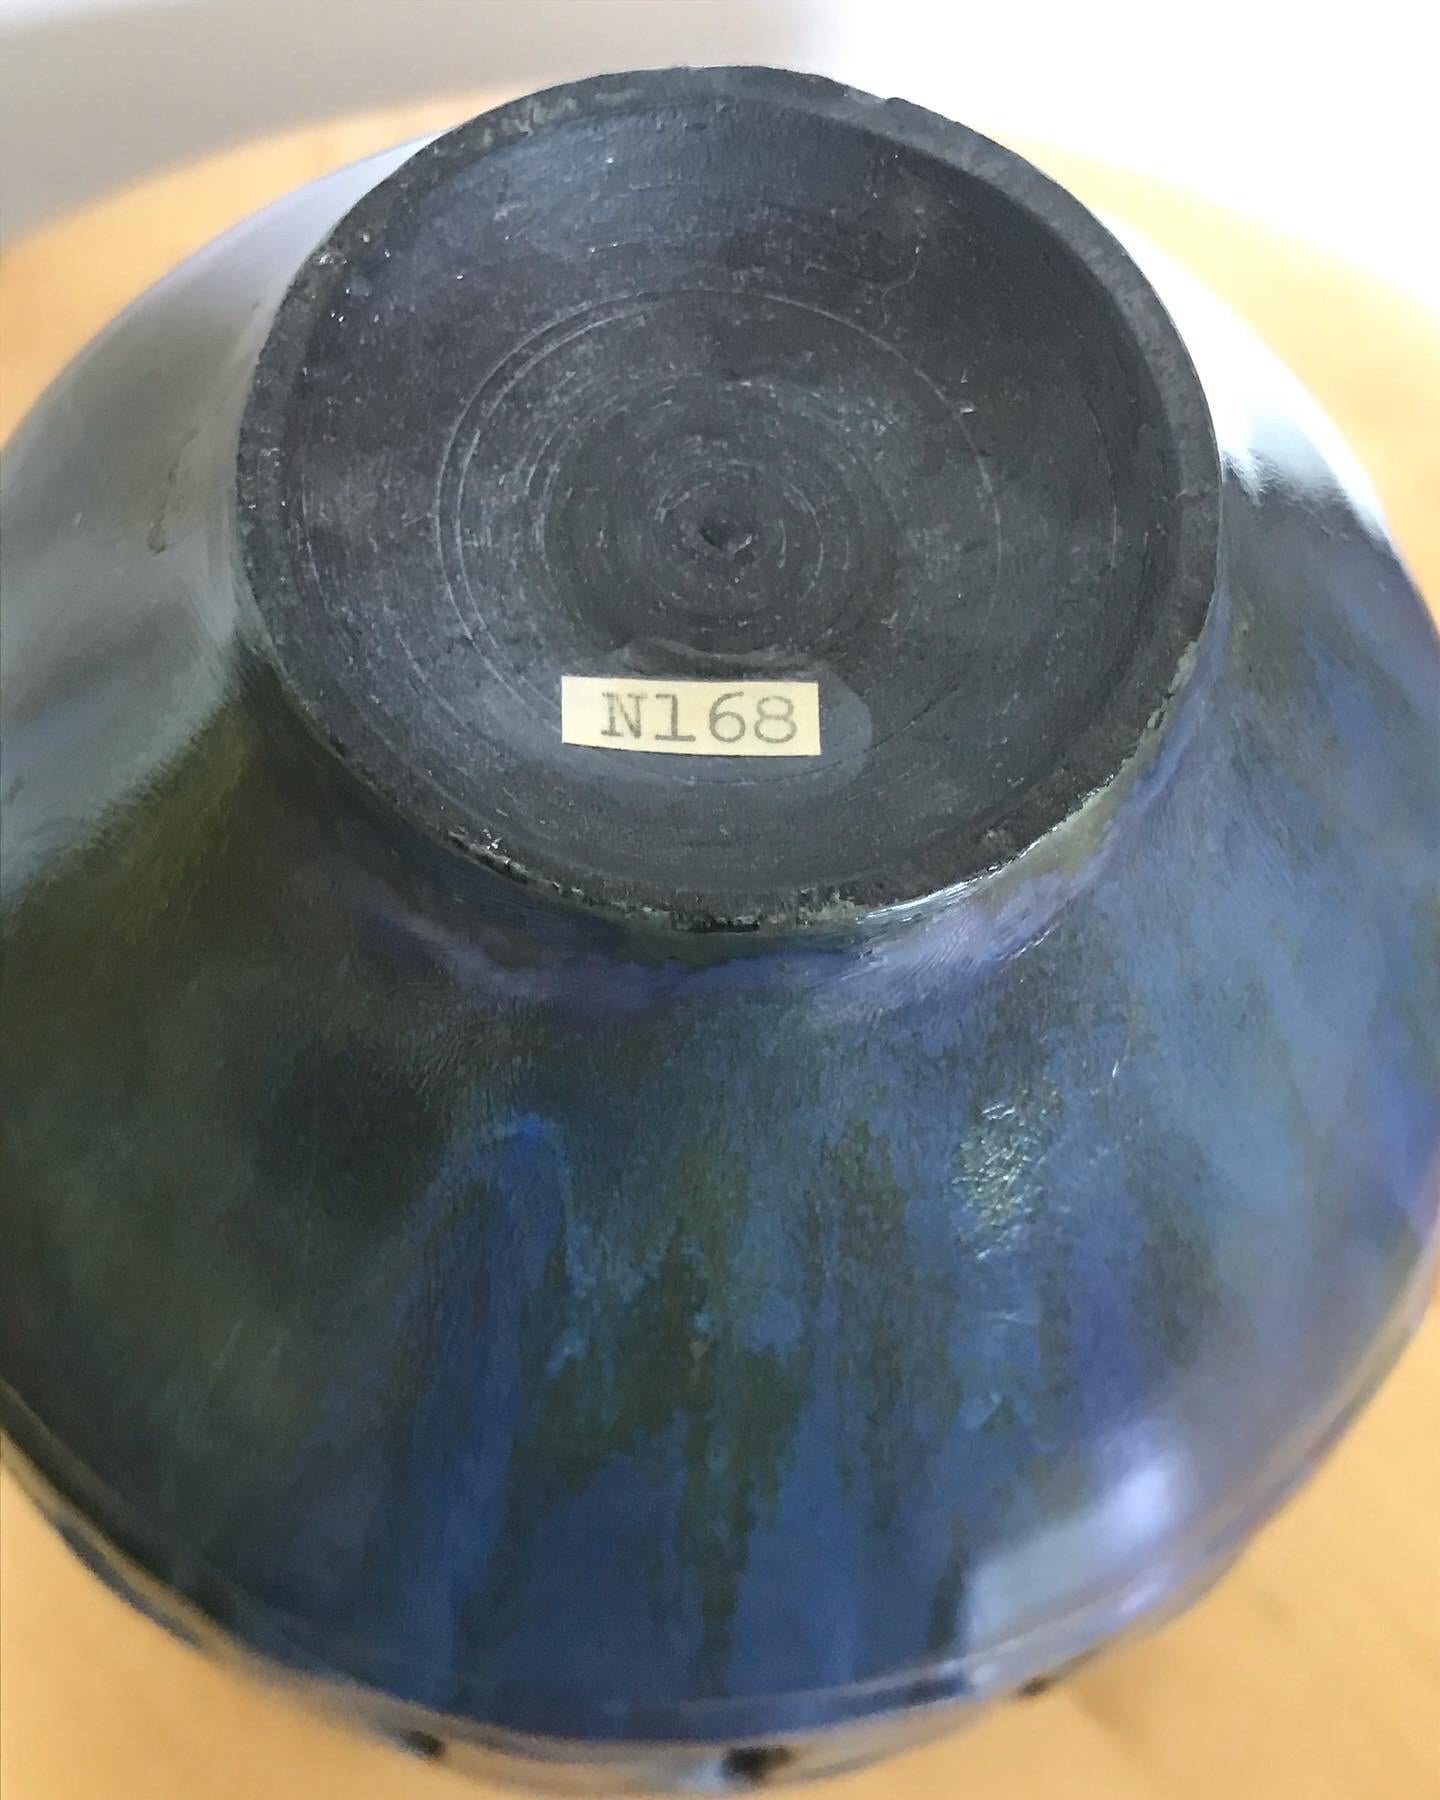 A rare piece with paper I.D. number.
In the late 1940's, Otto made some utilitarian ceramics that were unsigned for a short lived company called the Guild.
A typical wheel thrown form by Gertrud.
Glazed by Otto with fissure accents and geometric